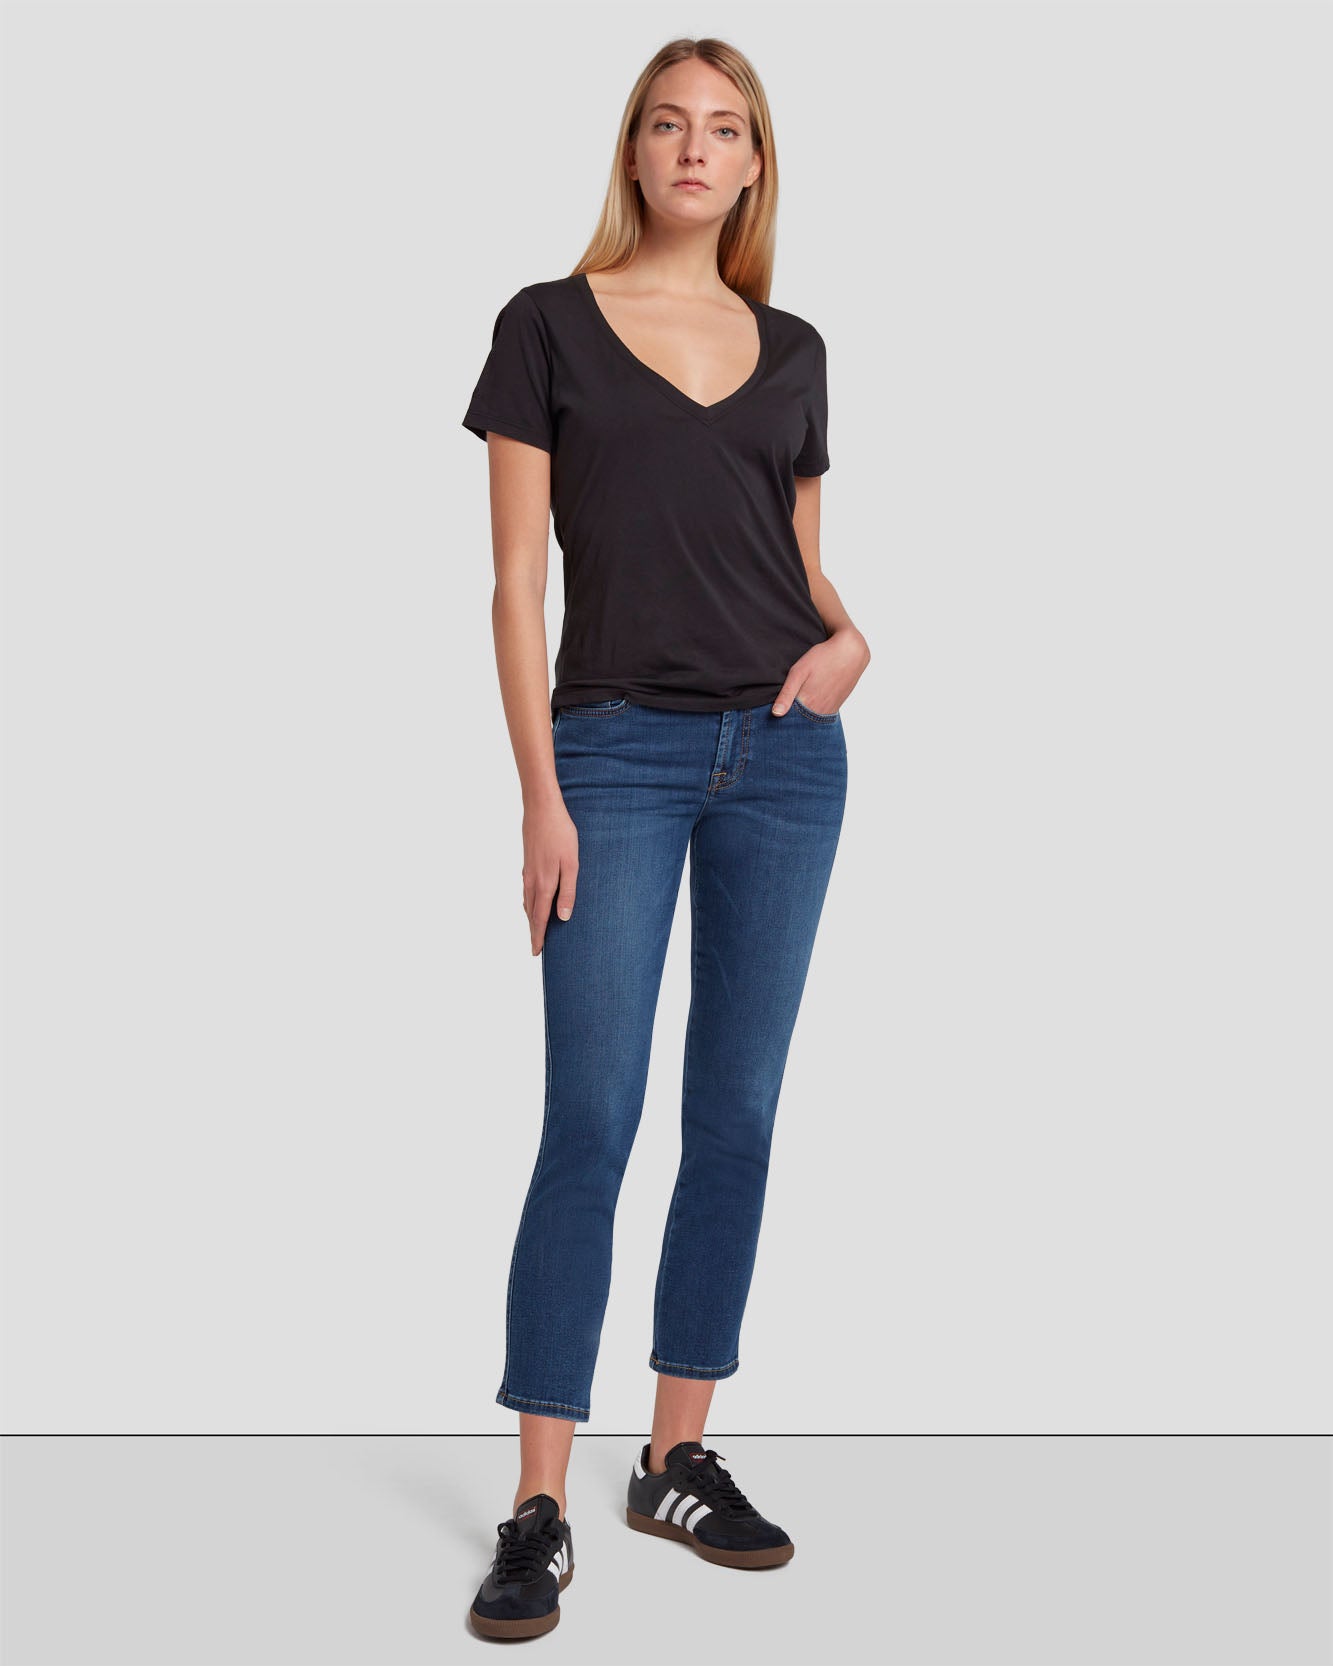 B(air) Kimmie Cropped Straight in Duchess | 7 For All Mankind